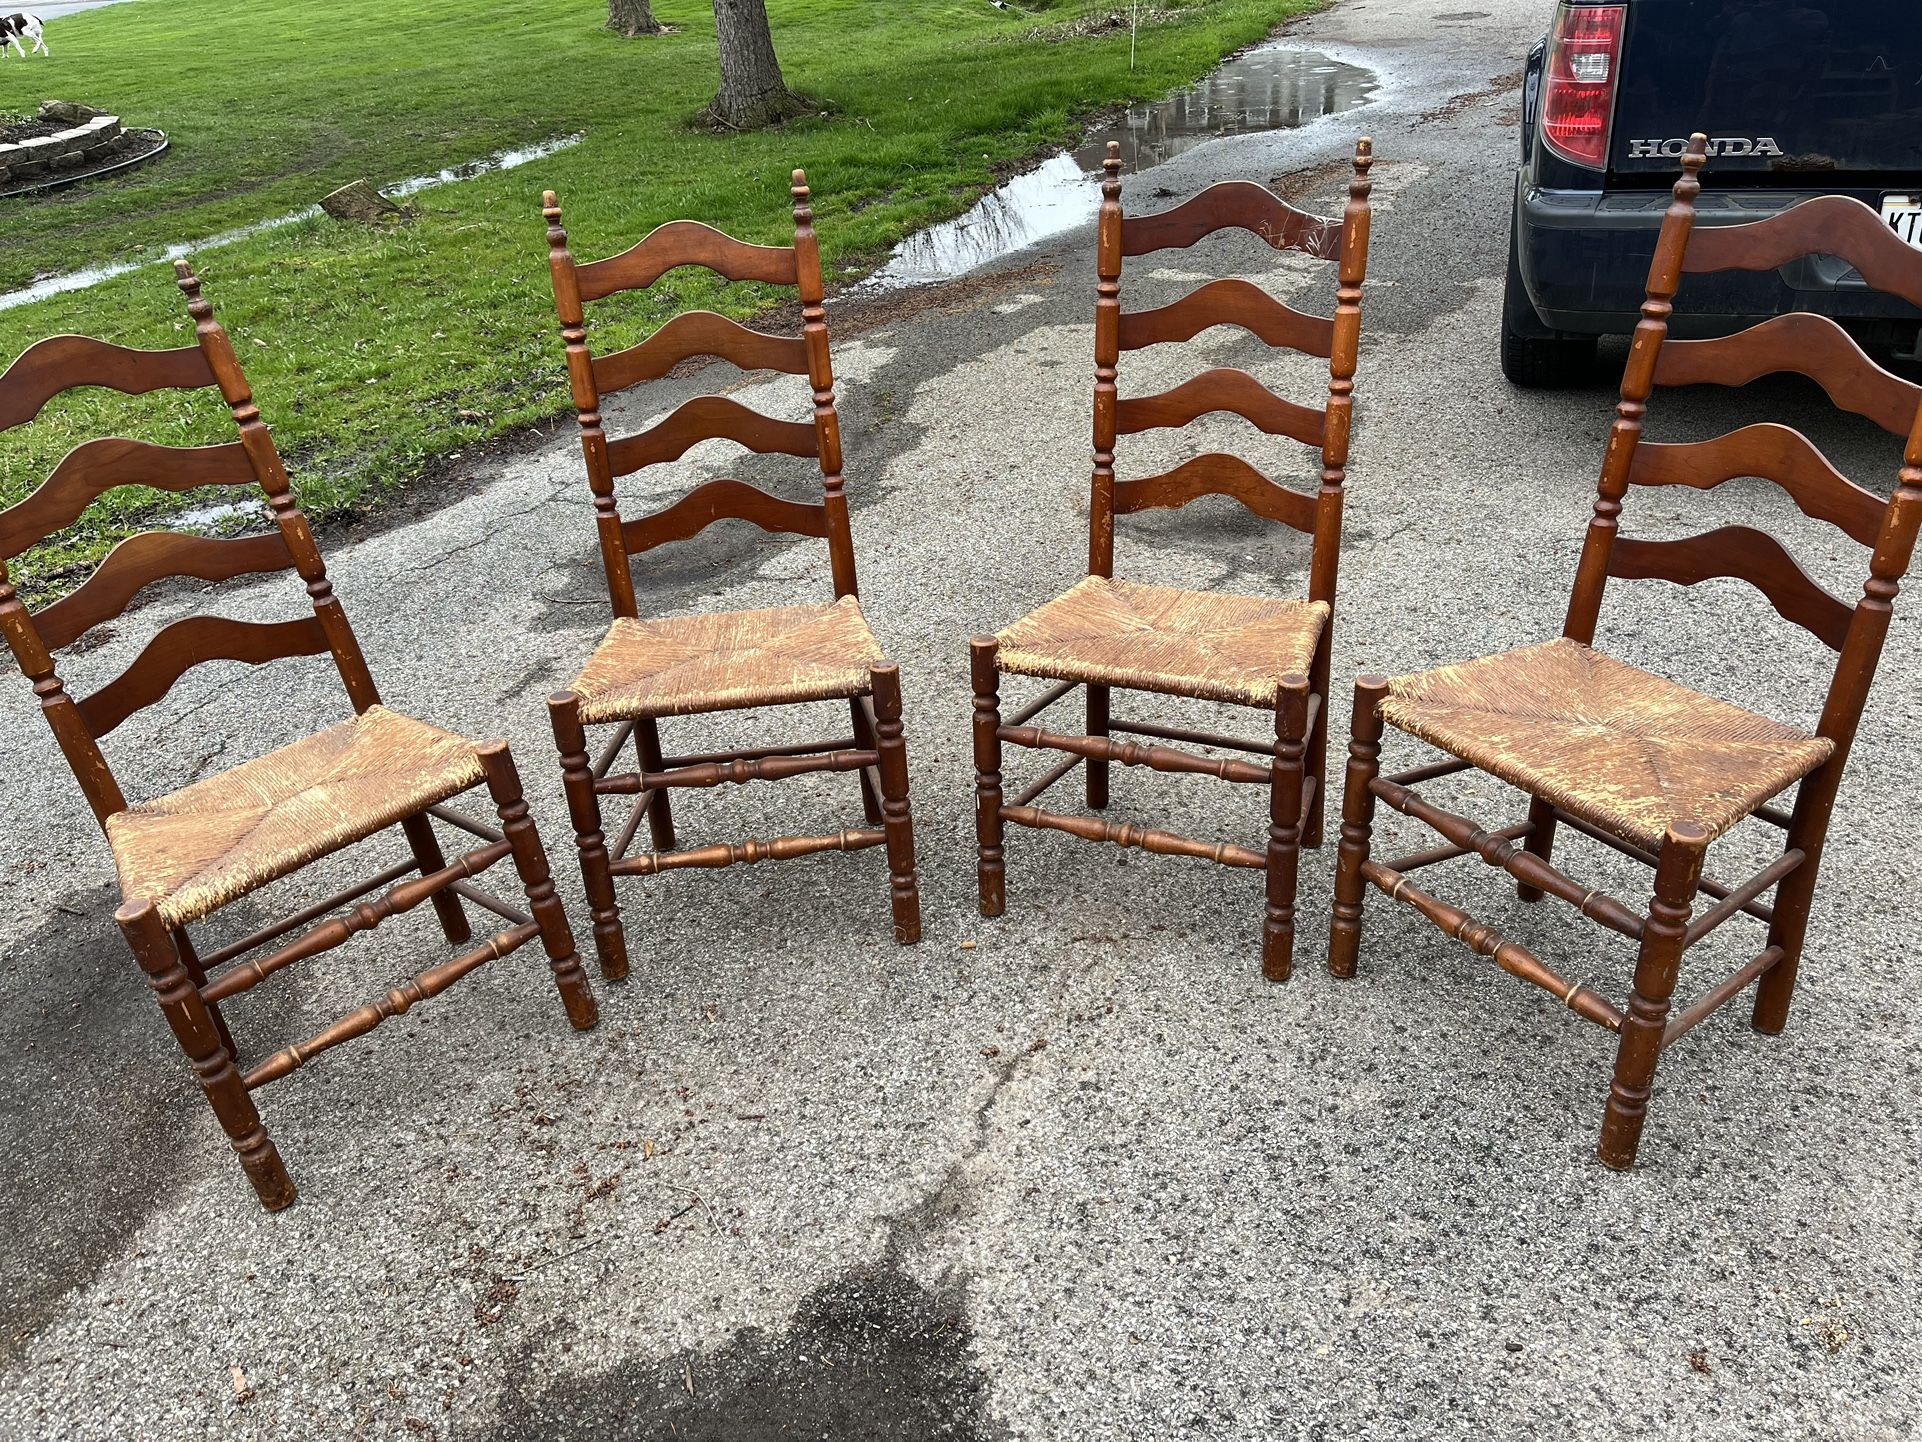 Ladder Chairs 